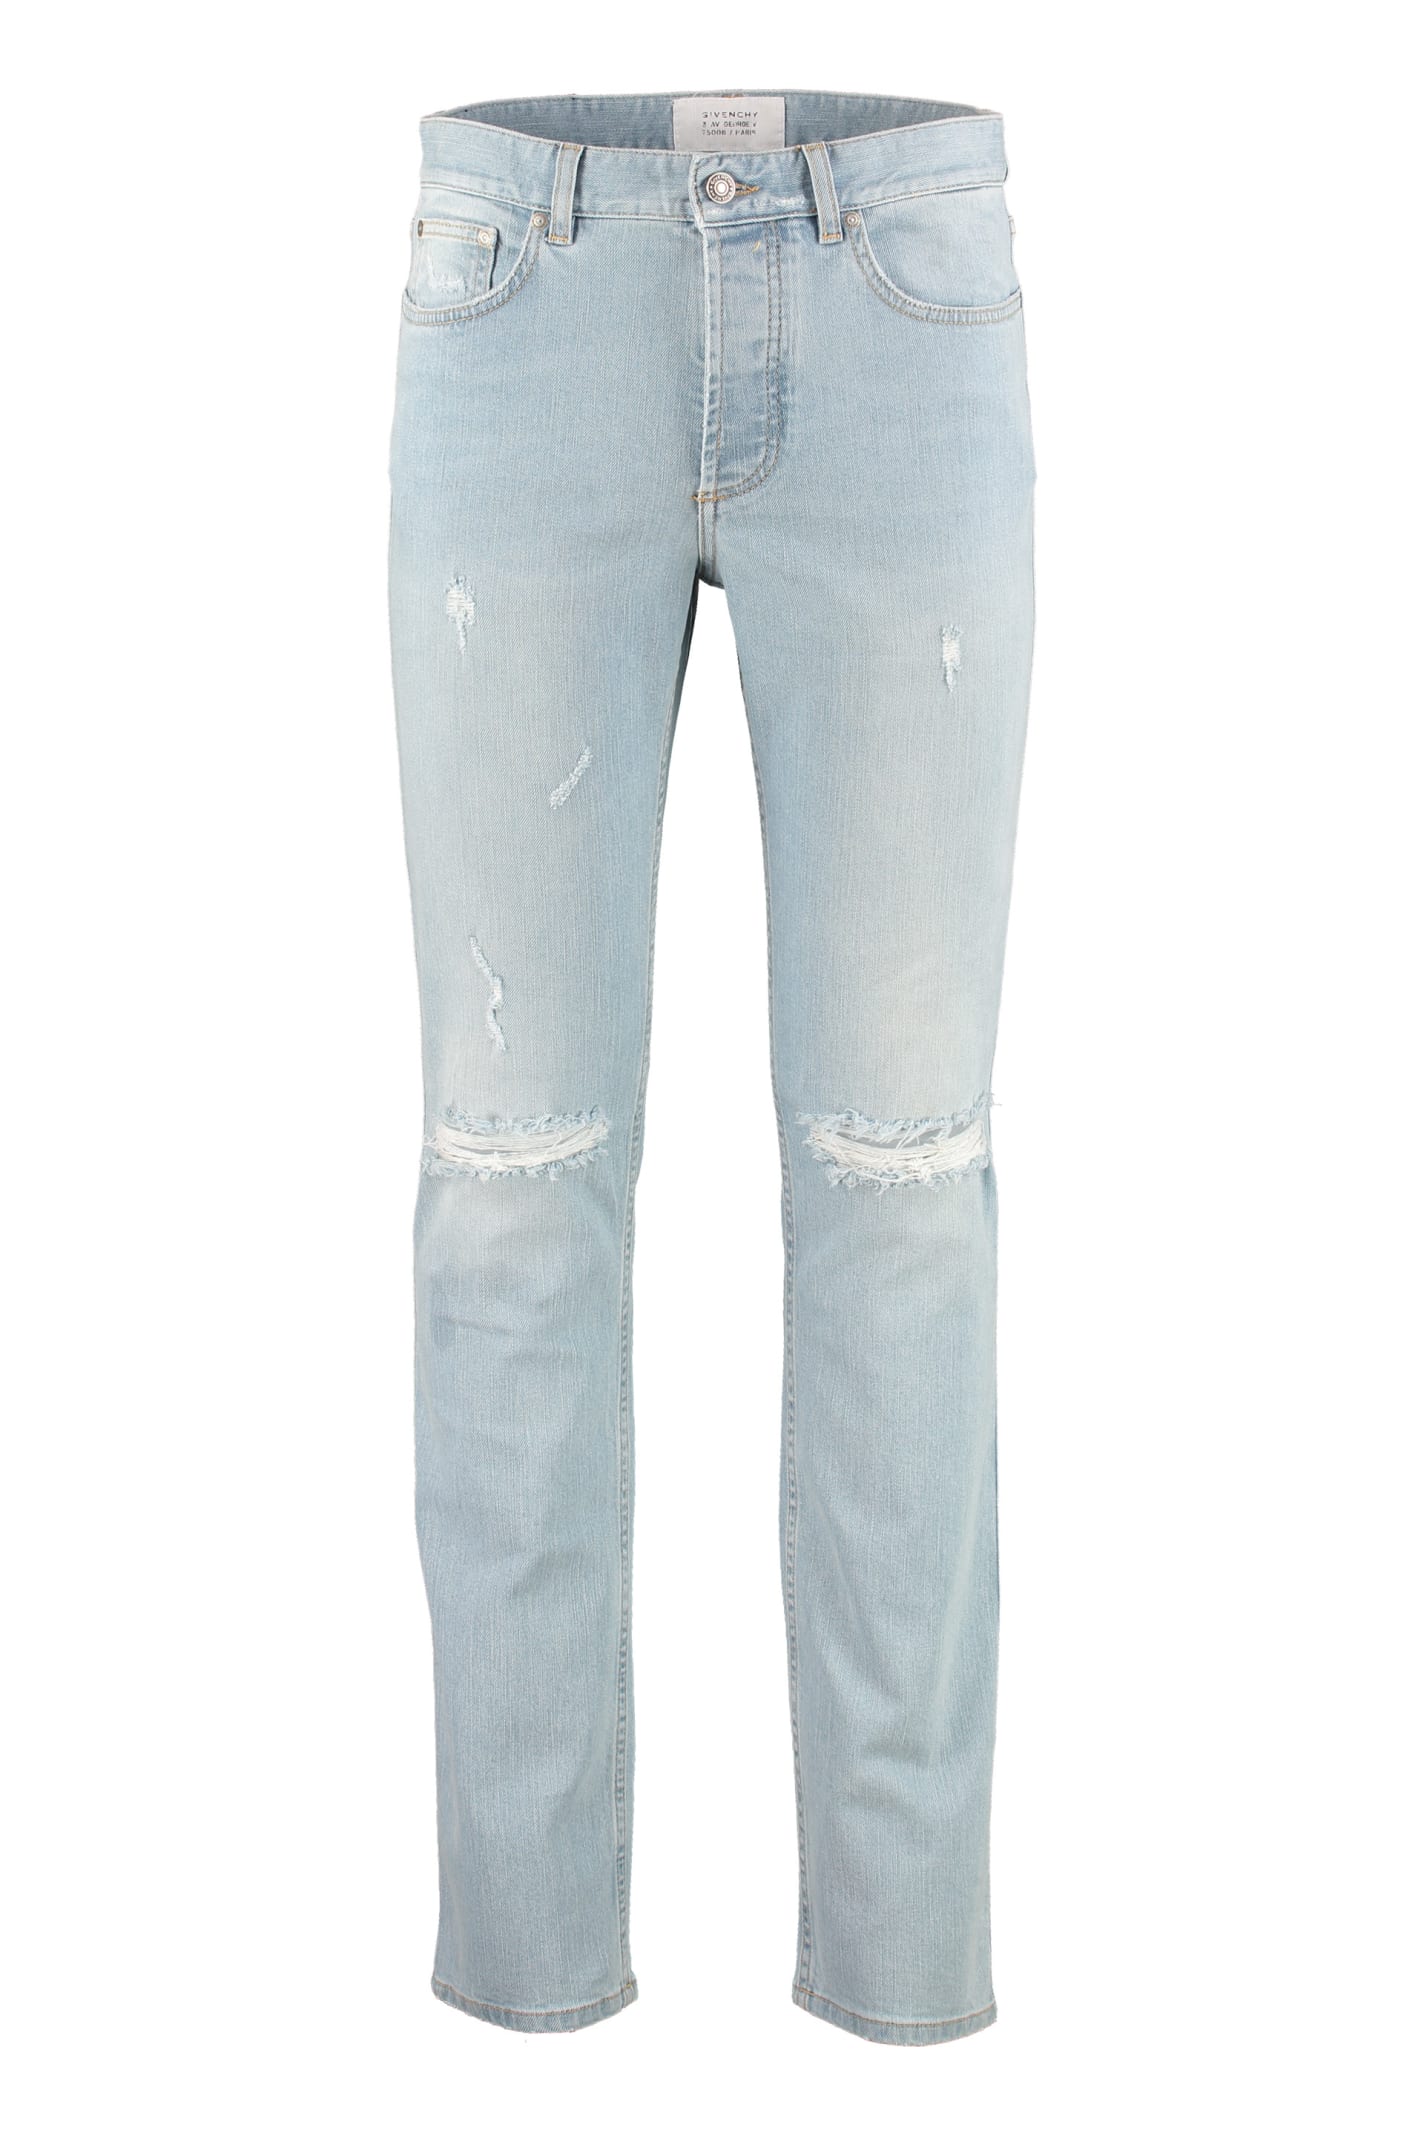 Givenchy Distressed Slim Fit Jeans In Denim